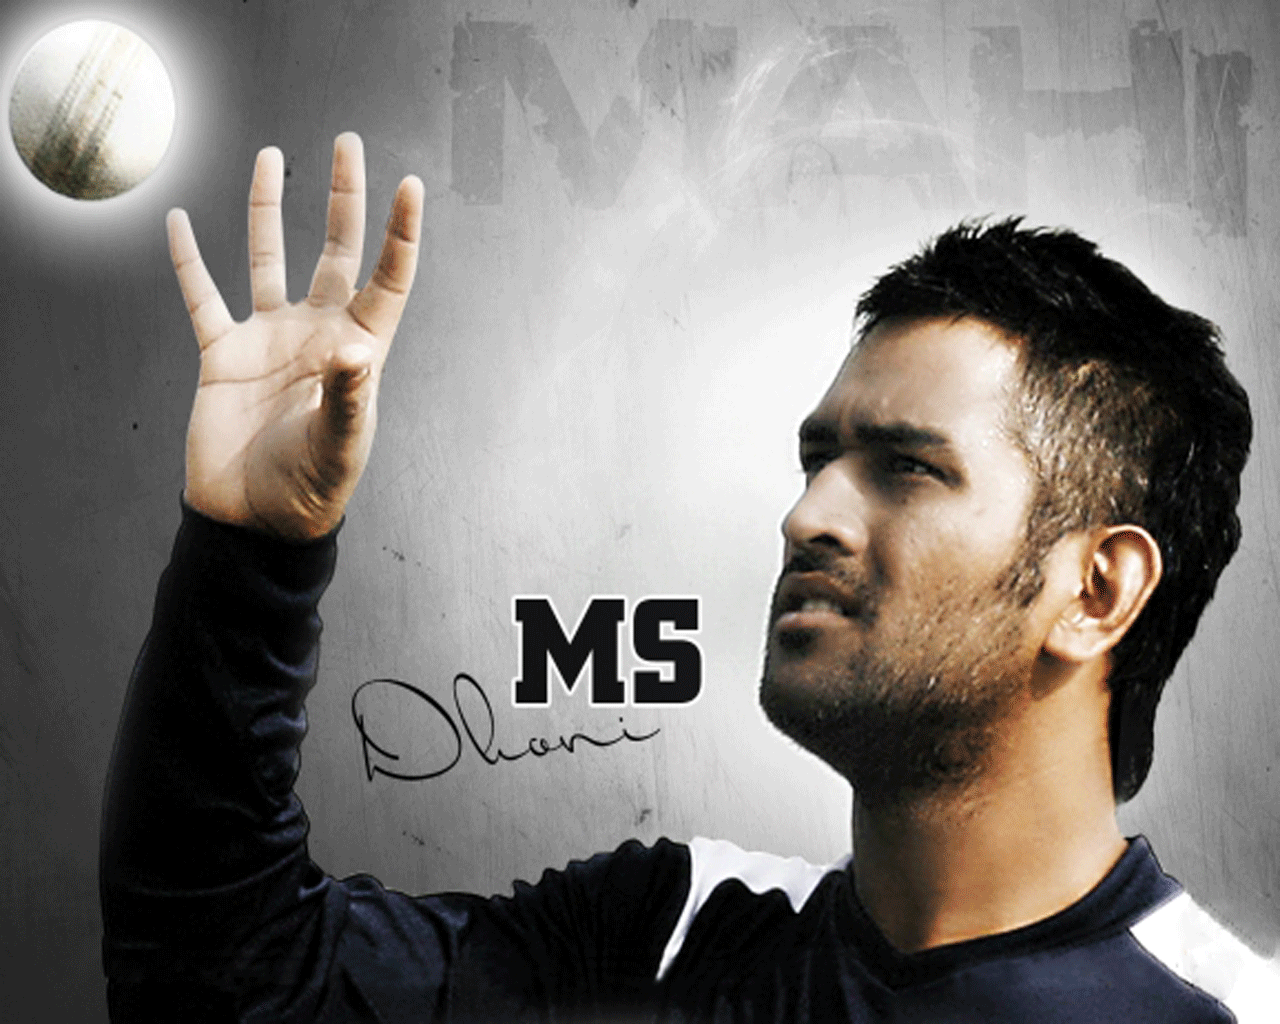 Leadership and managerial qualities to learn from MS Dhoni, Indian